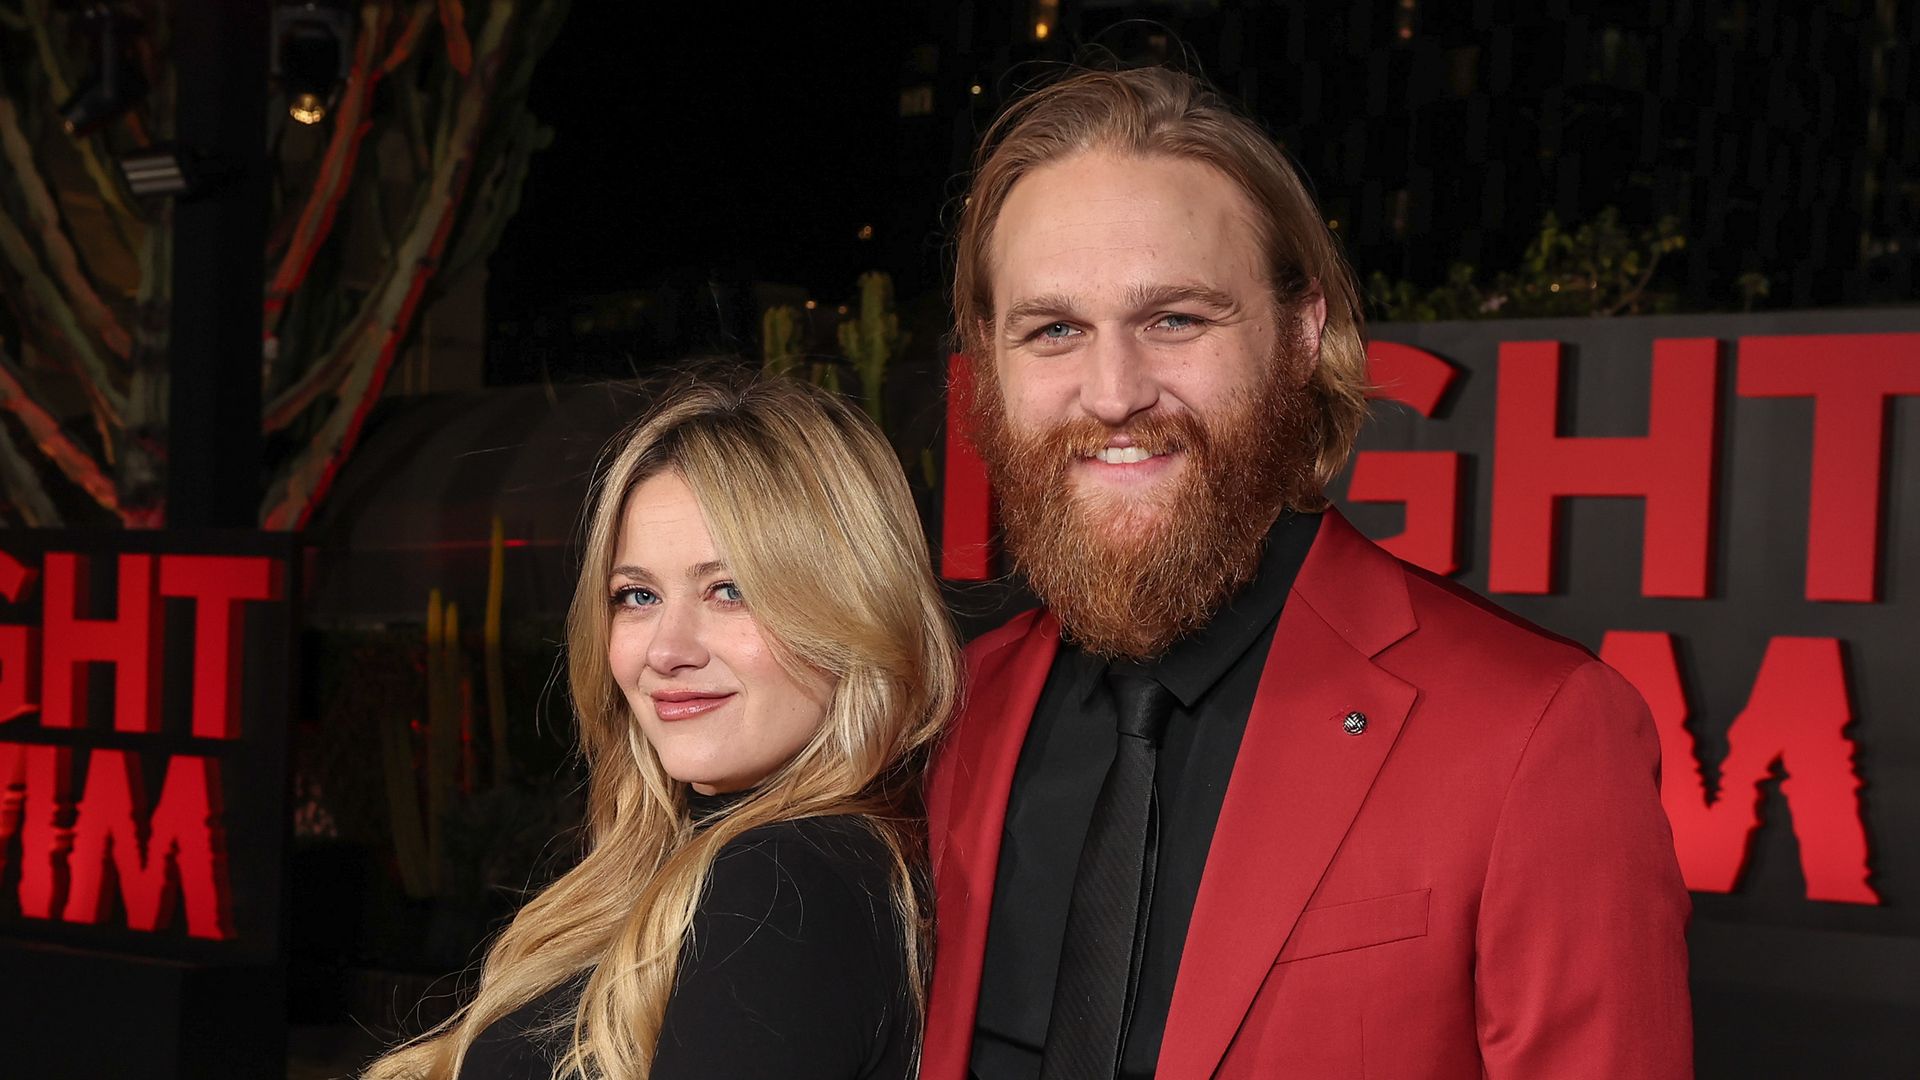 Meredith Hagner and Wyatt Russell at the premiere of "Night Swim" held at Hotel Figueroa on January 3, 2024 in Los Angeles, California.